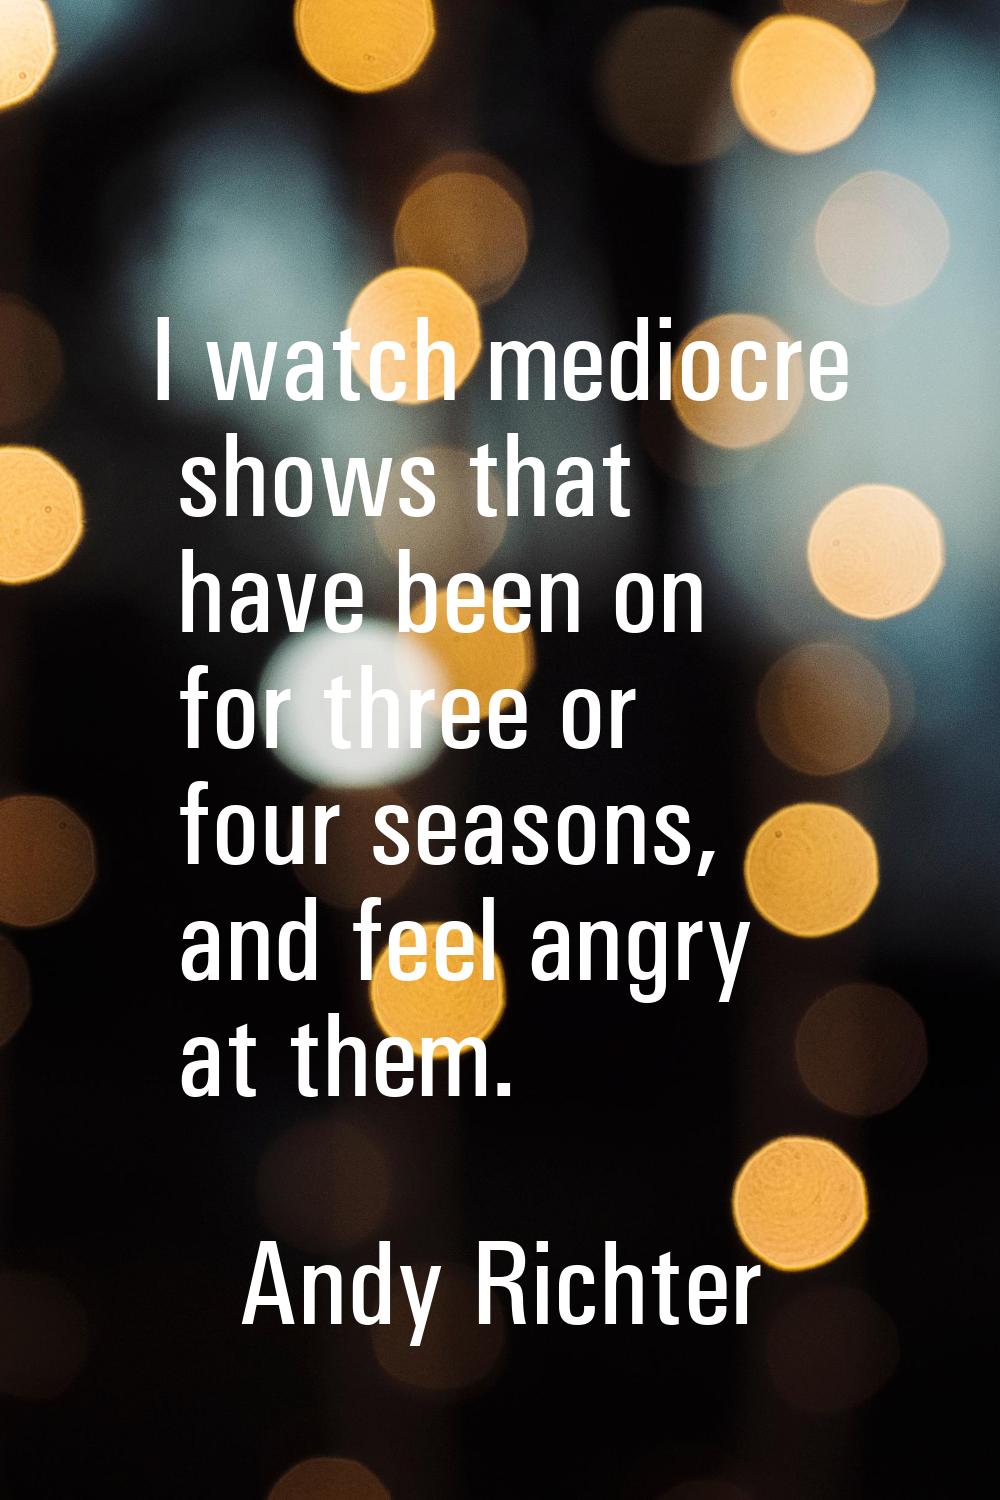 I watch mediocre shows that have been on for three or four seasons, and feel angry at them.